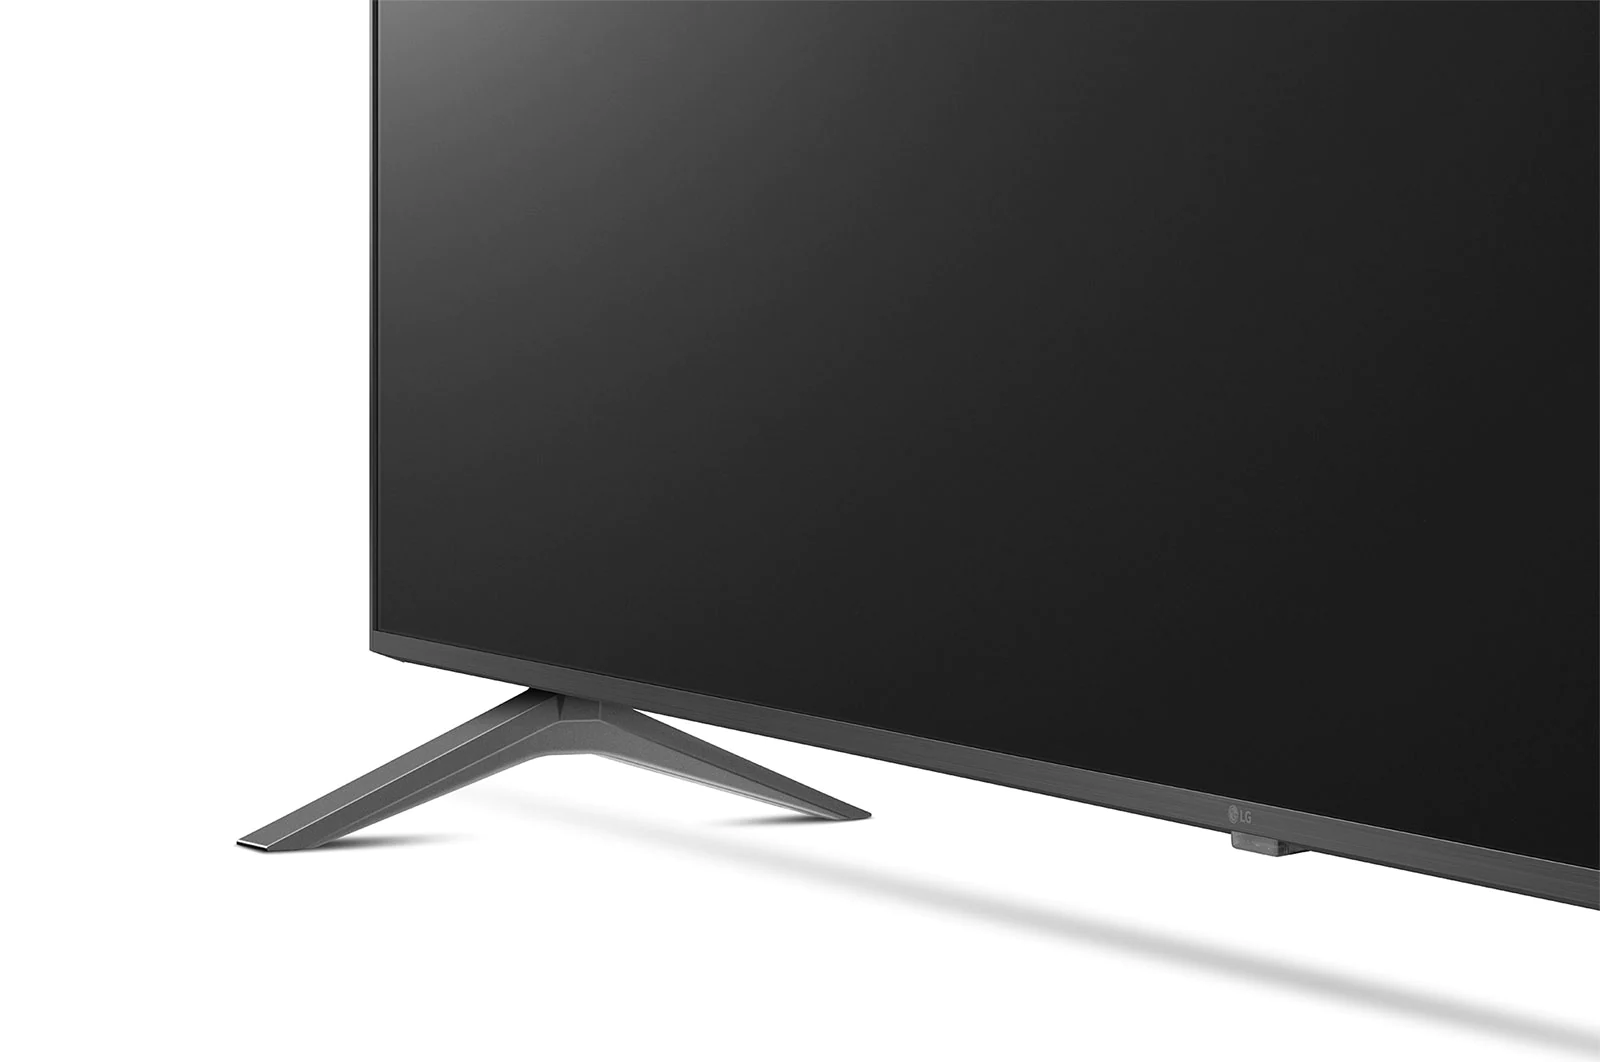 LG 70-inch UHD TV With Cinematic Screen 4K Active HDR Design